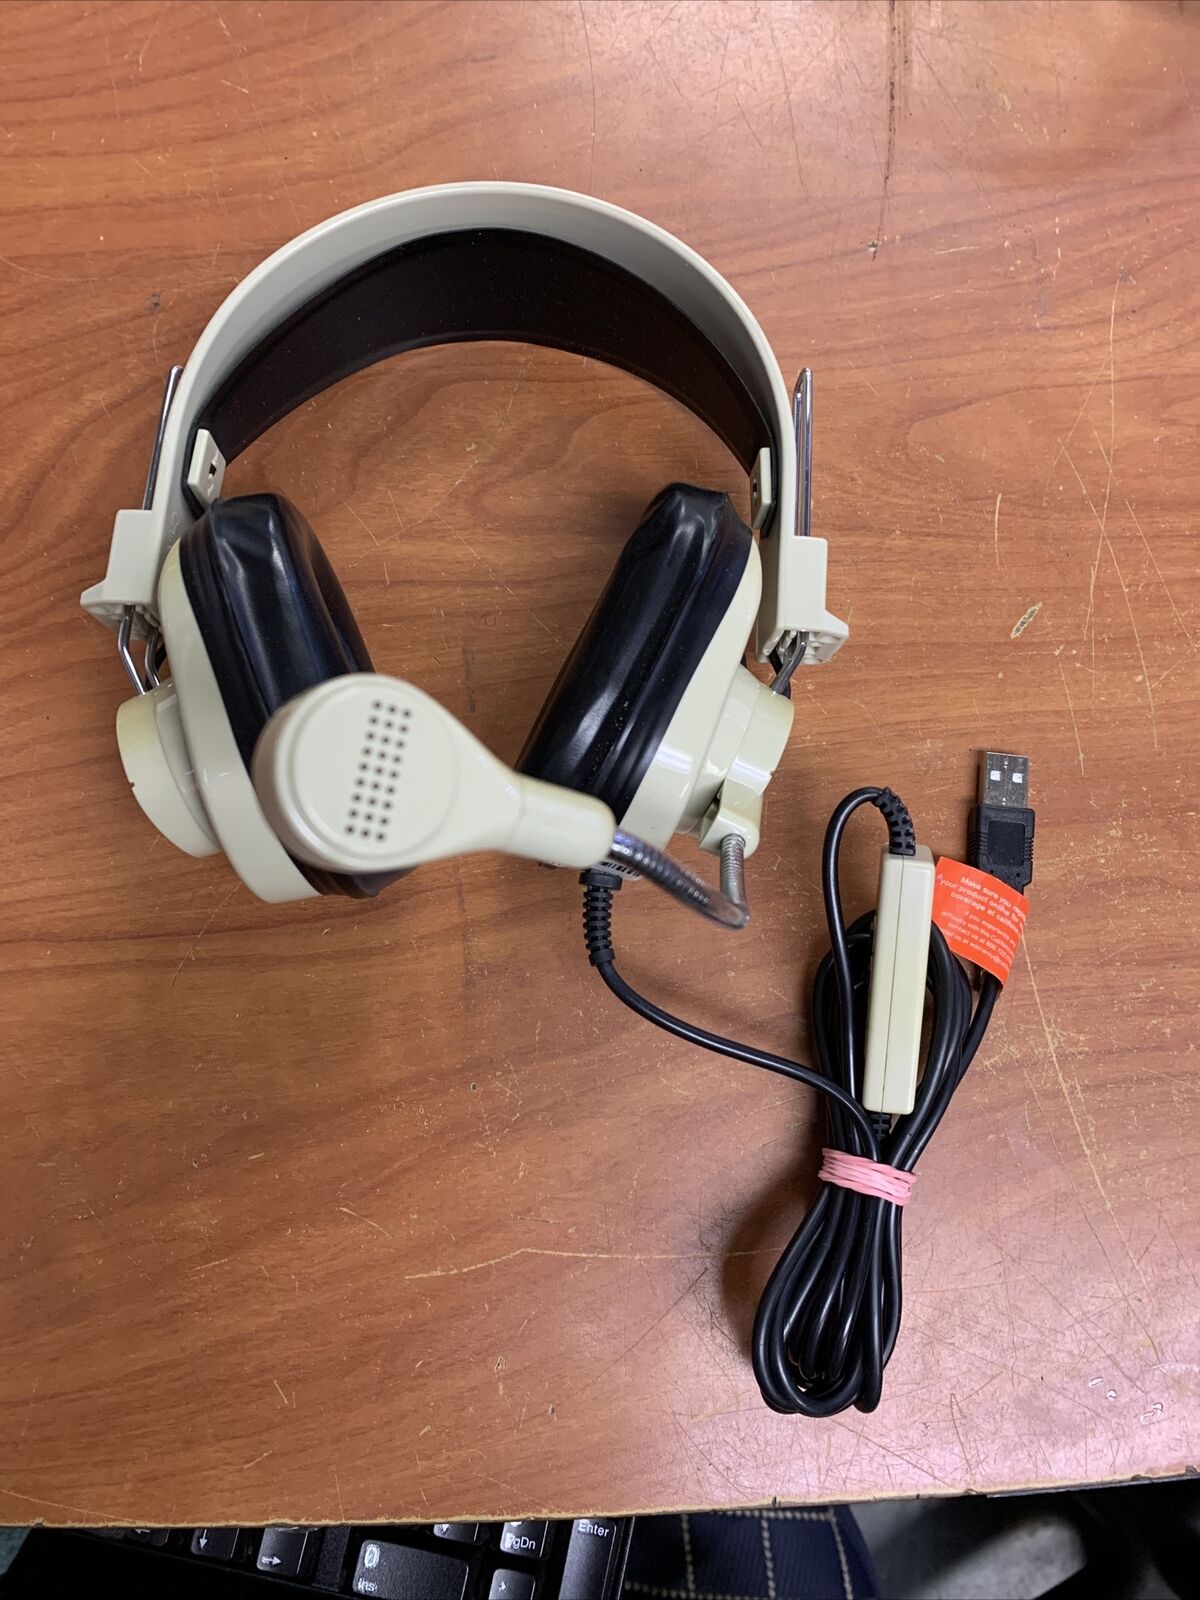 Califone 3066-USB Deluxe Stereo Headset, High Speed Connectivity, USB 2.0